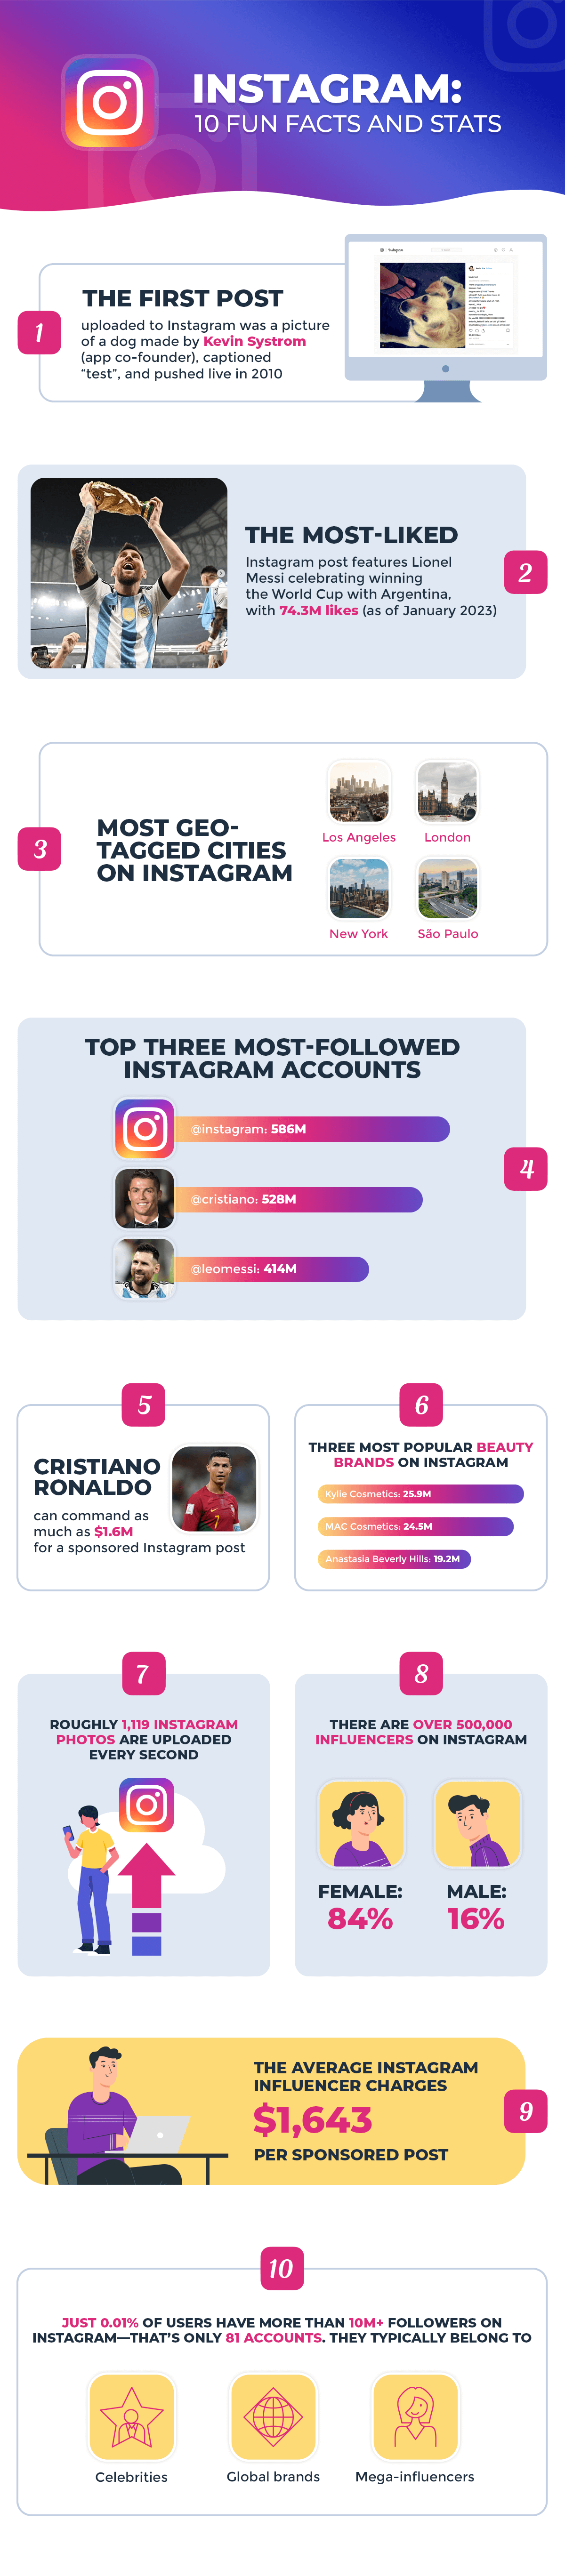 Instagram: 10 fun facts and statistics